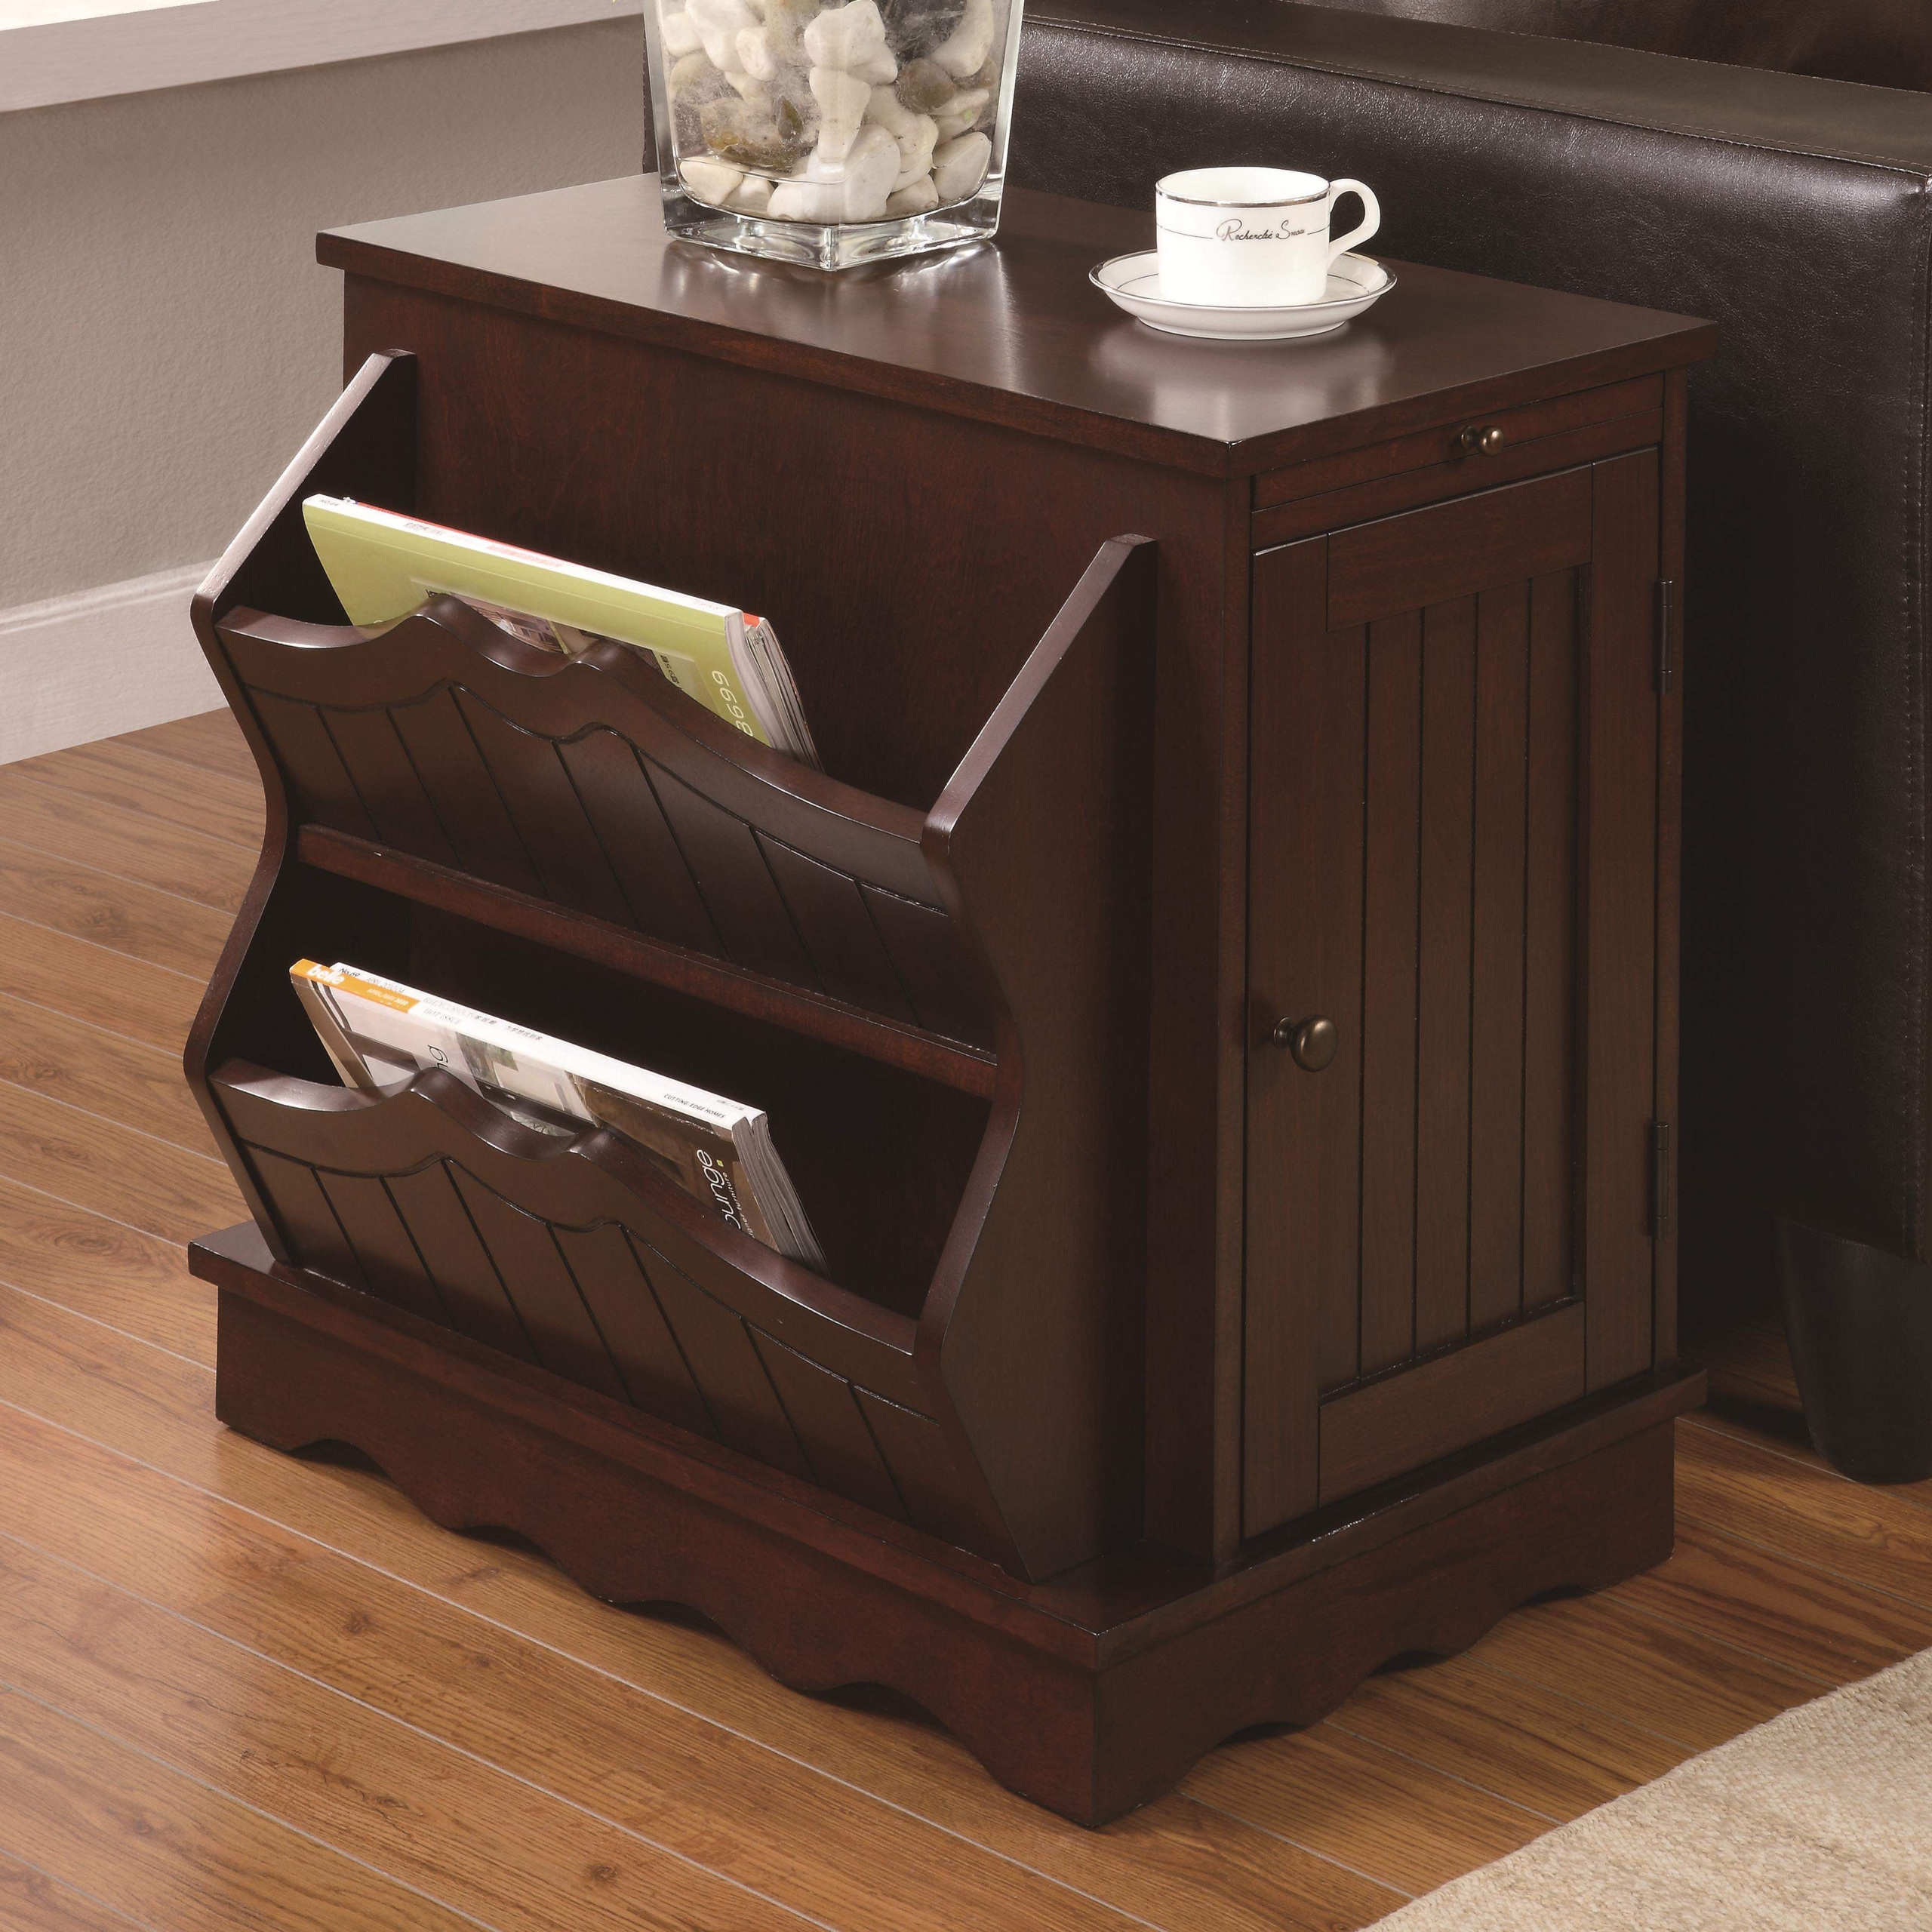 Lauren co tables harvard side table with magazine rack